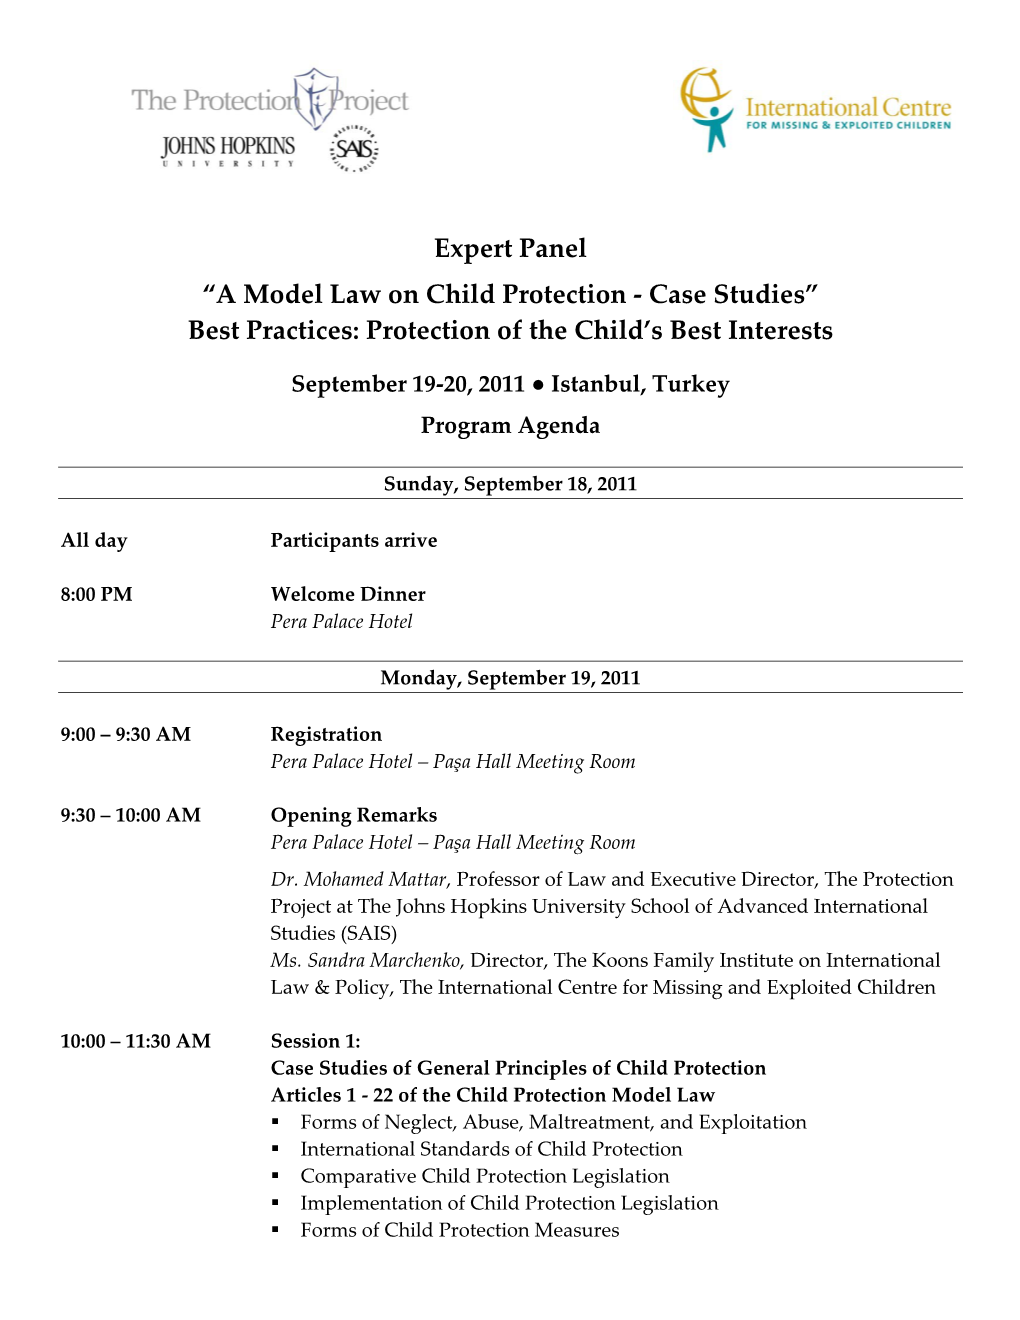 A Model Law on Child Protection - Case Studies” Best Practices: Protection of the Child’S Best Interests